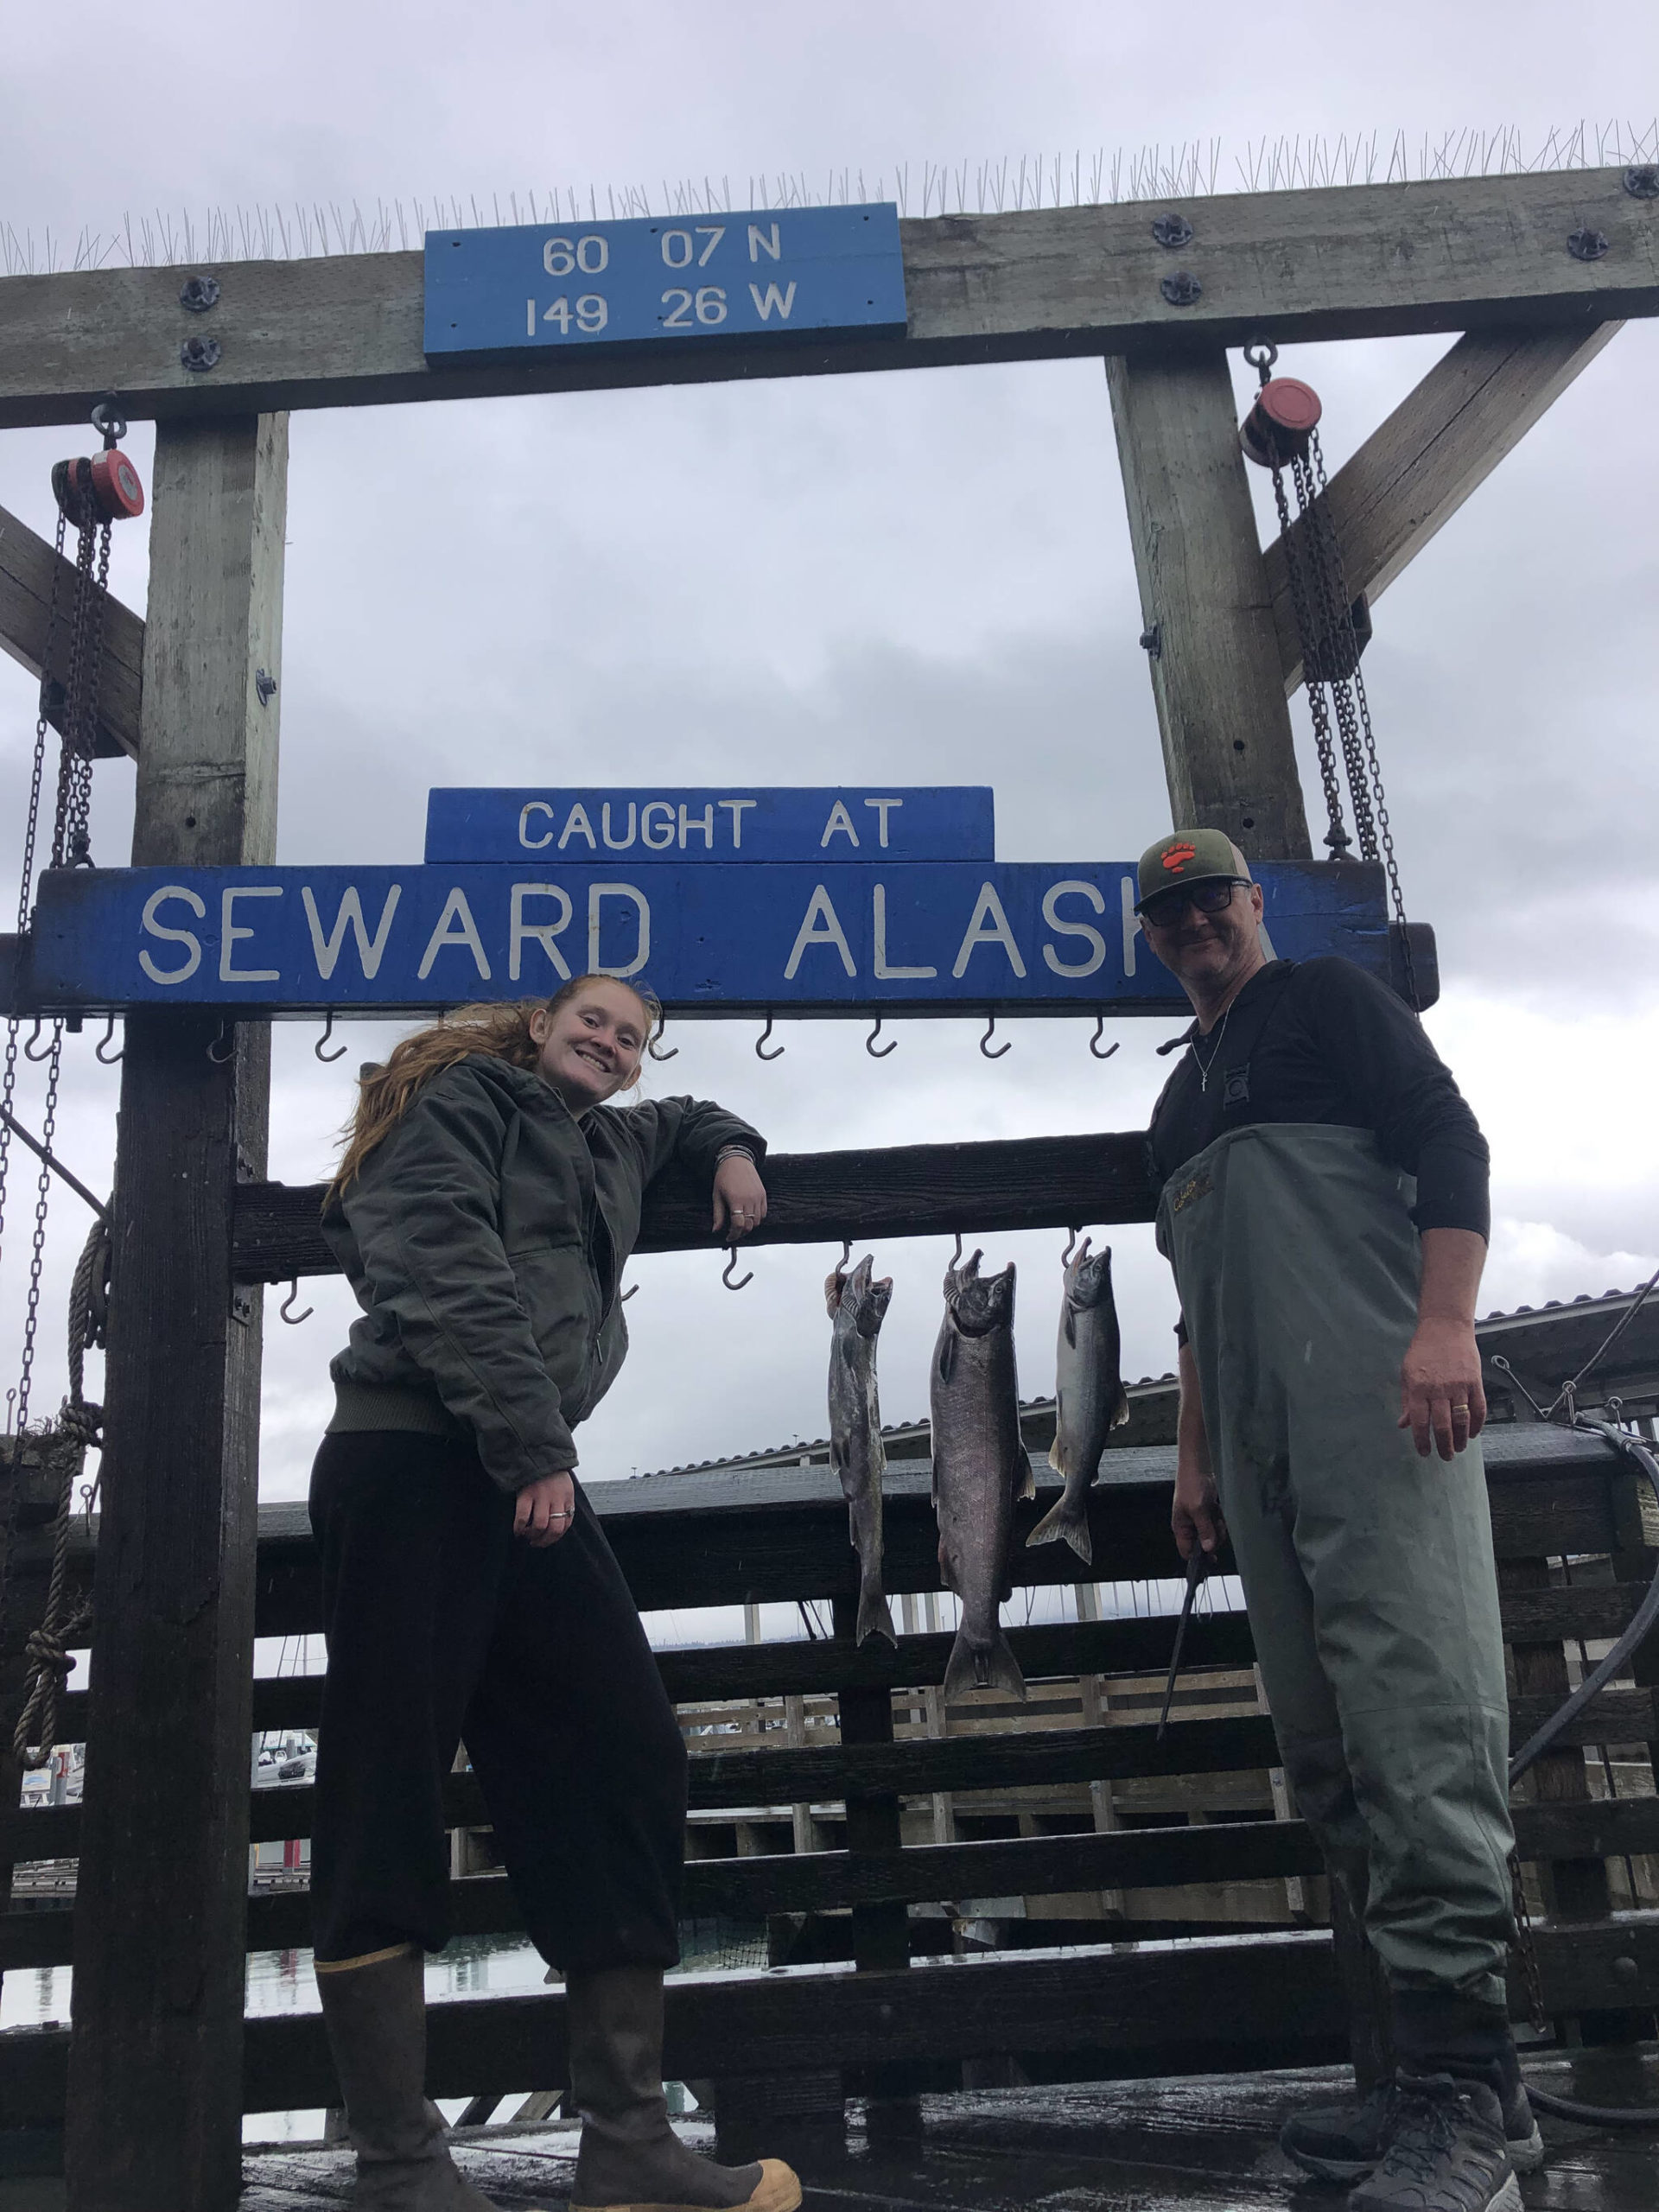 My dad and I pose with our salmon at the Seward harbor on Sept. 8, 2021. (Photo provided)